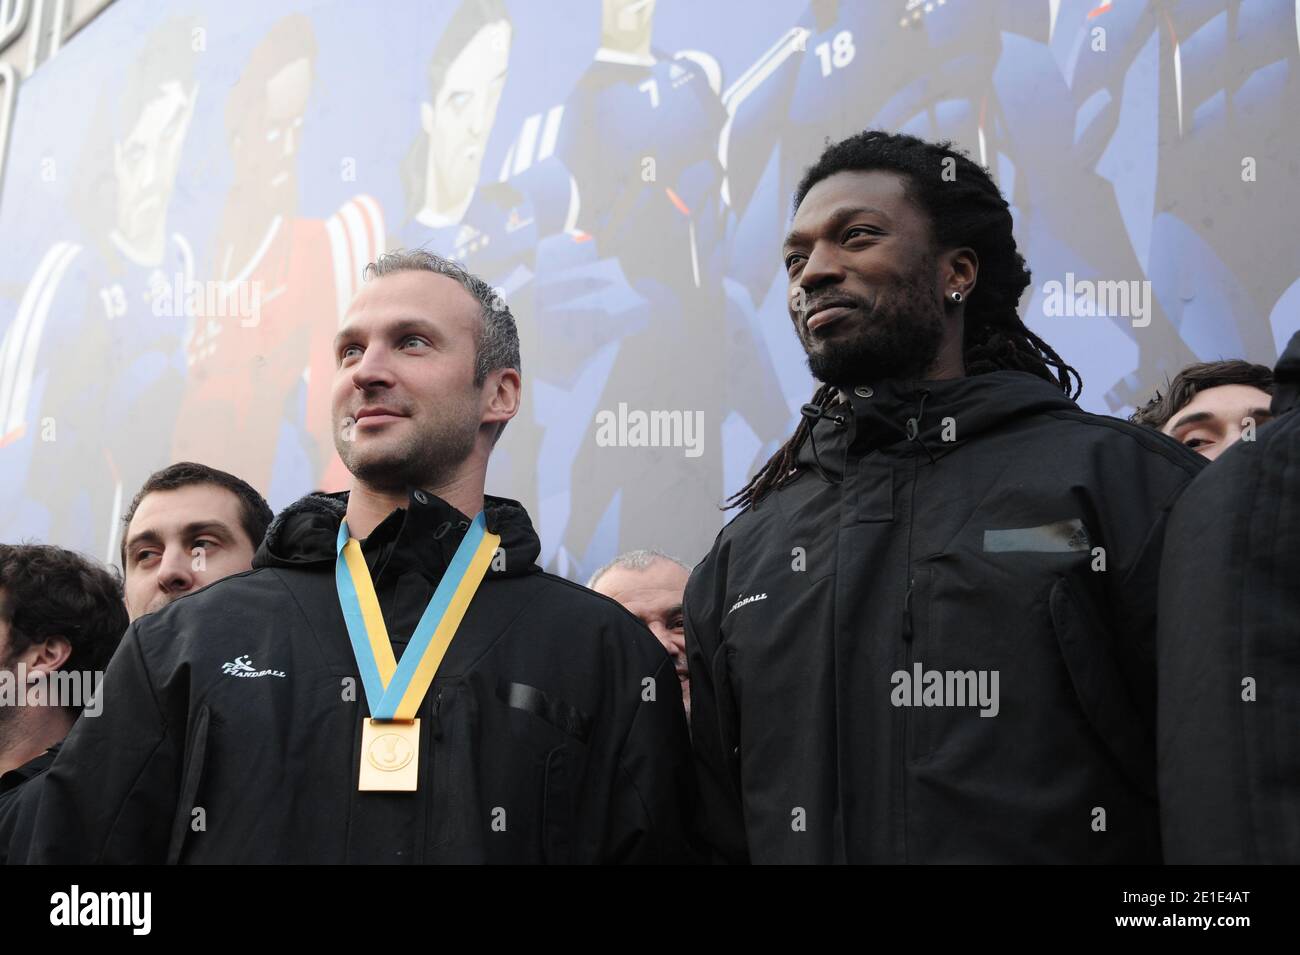 France's Daouda Karaboue and Thierry Omeyer arrive for a autographs session  and press conference at Adidas Store on the Champs Elysees avenue in Paris,  France on January 31, 2011 after winning the